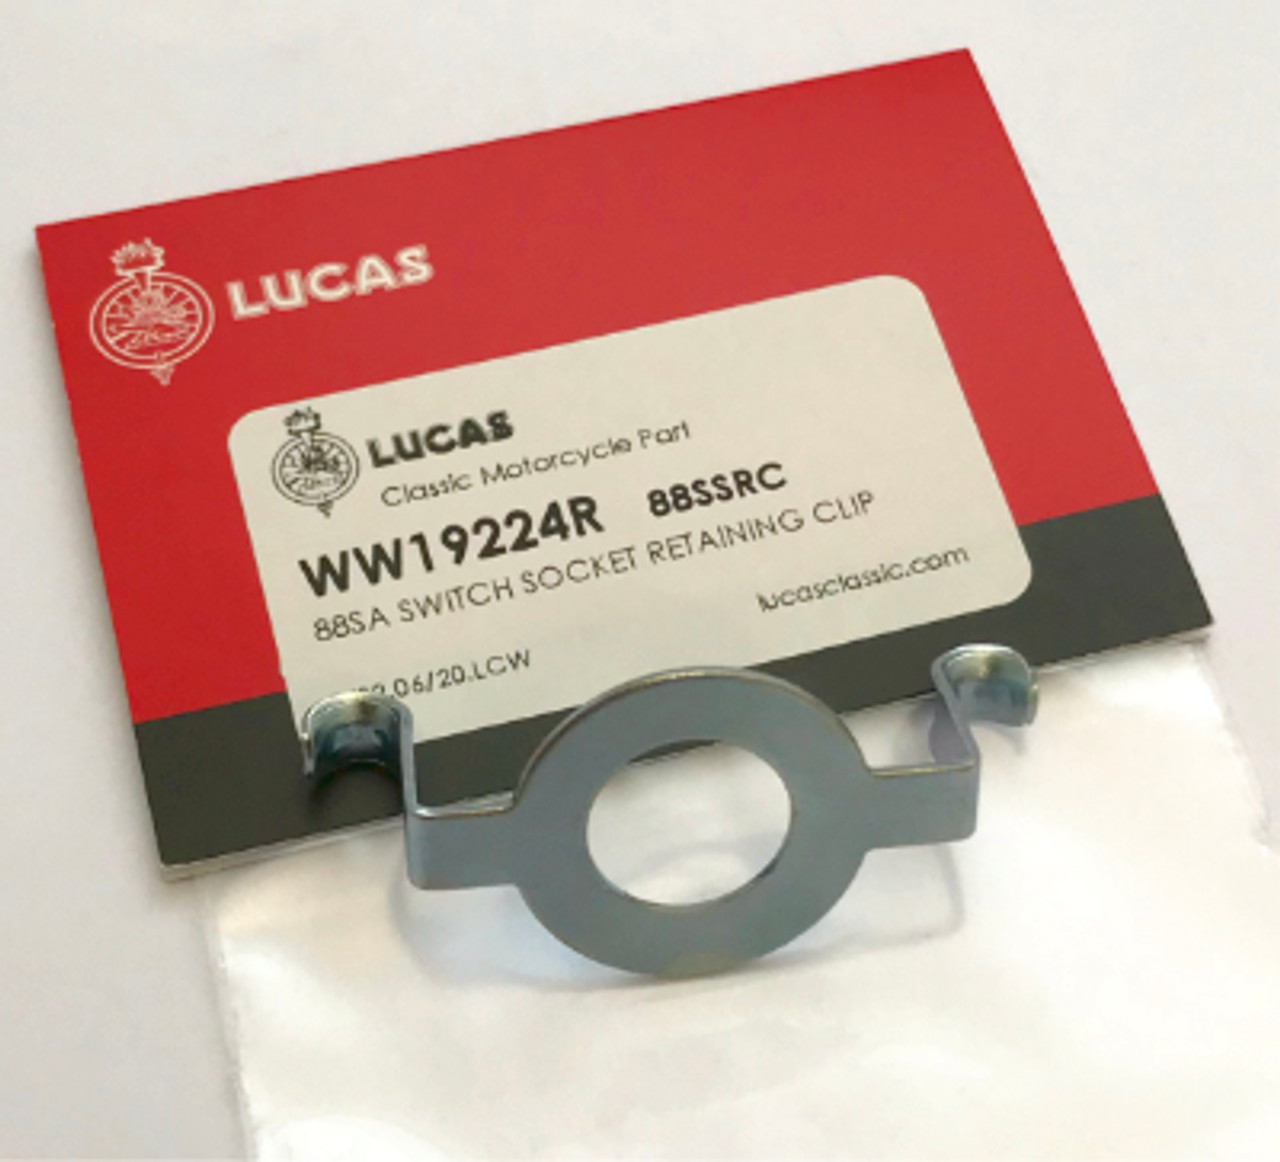 Genuine Lucas Classic 88SA Wiring Switch Socket Retaining Clip